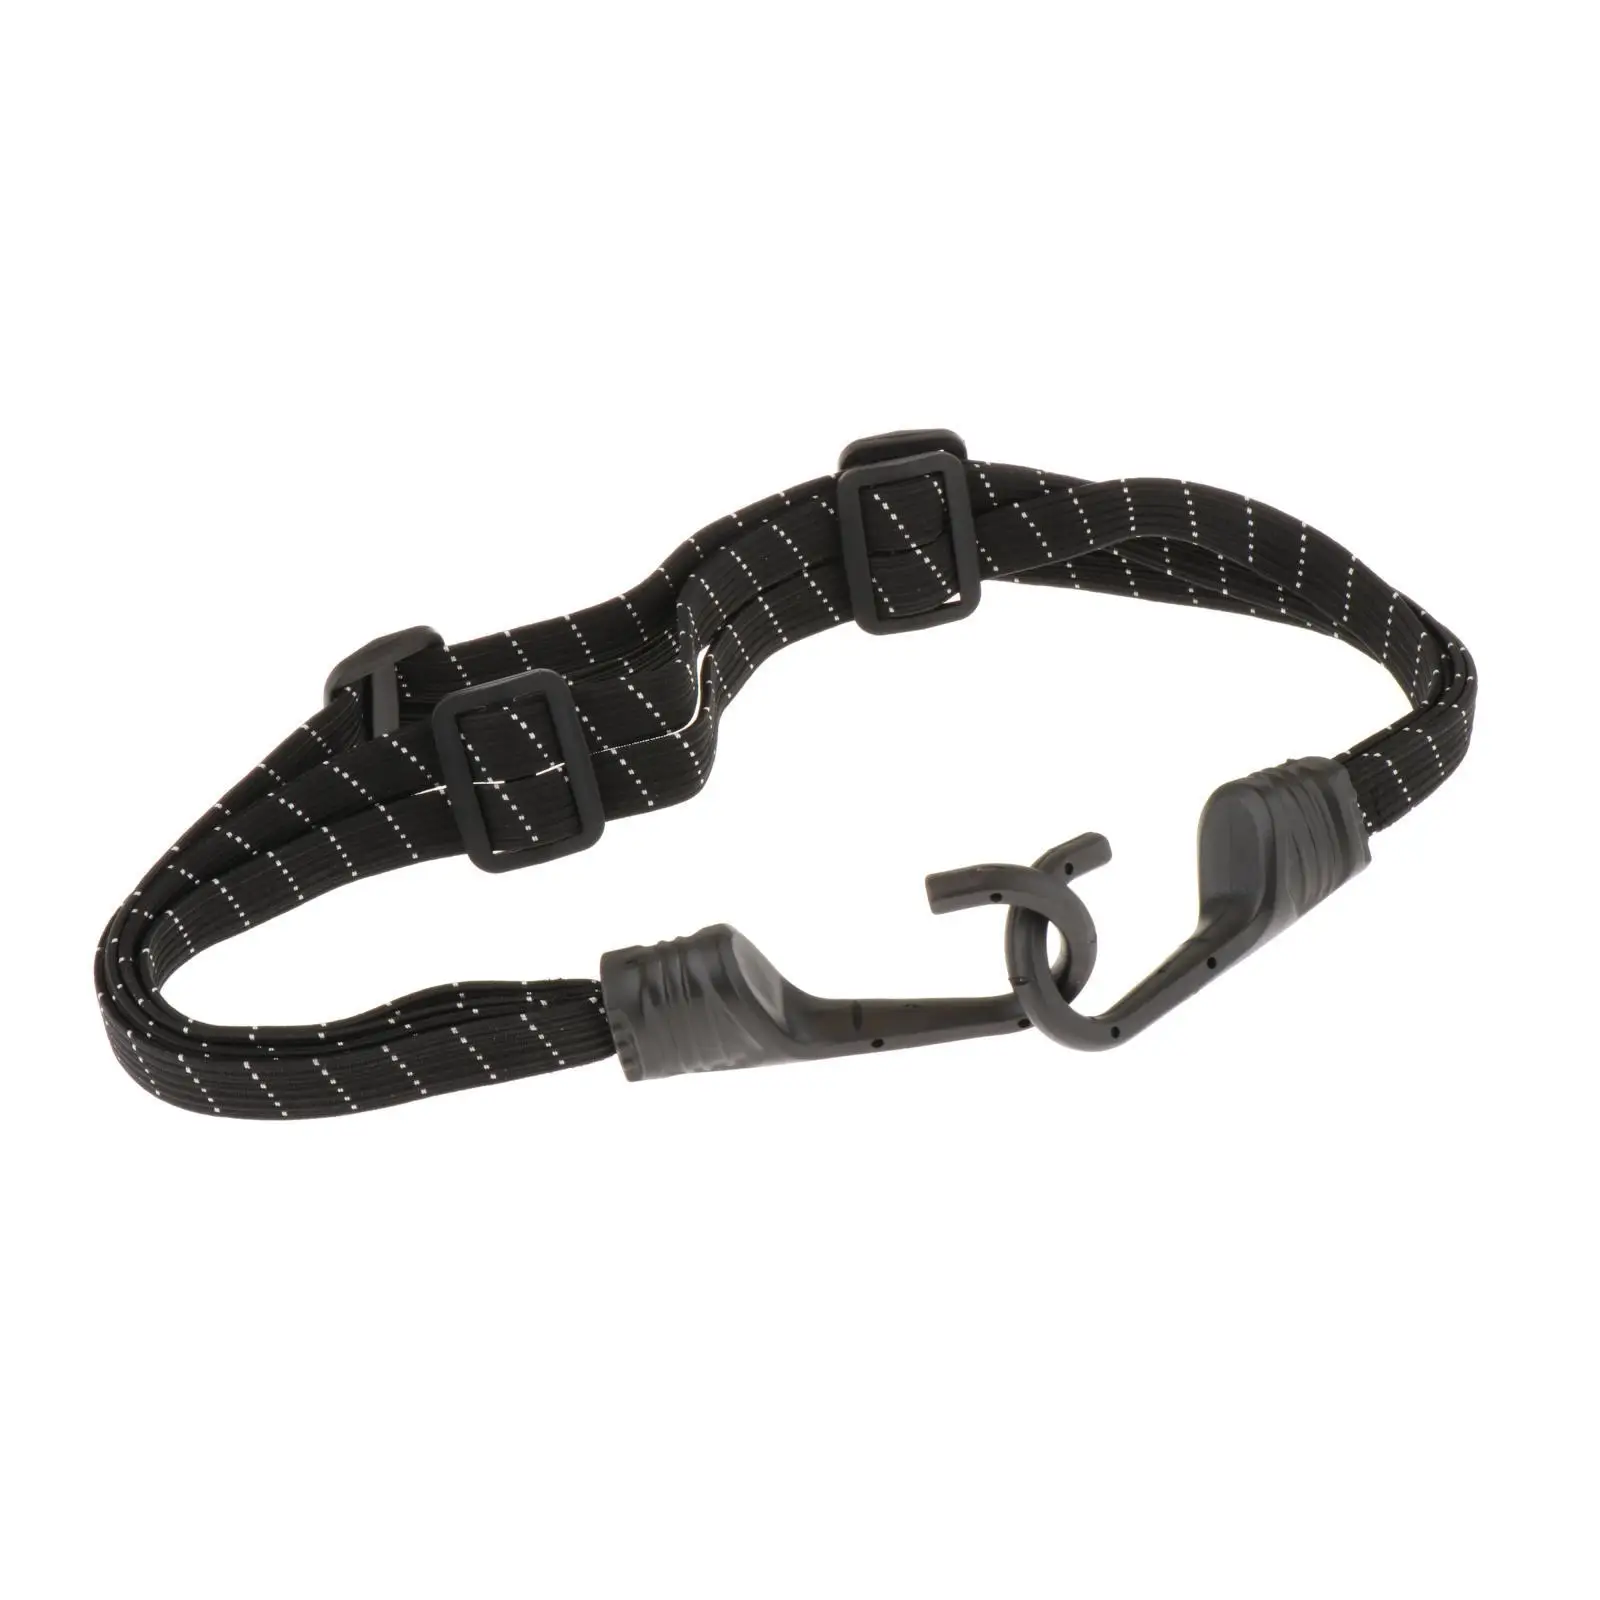 

Helmet Rope Electromobile Motorcycle Accessory Elastic Strap Motorcycle Luggage Strap Bungee Cord with Hooks Retractable